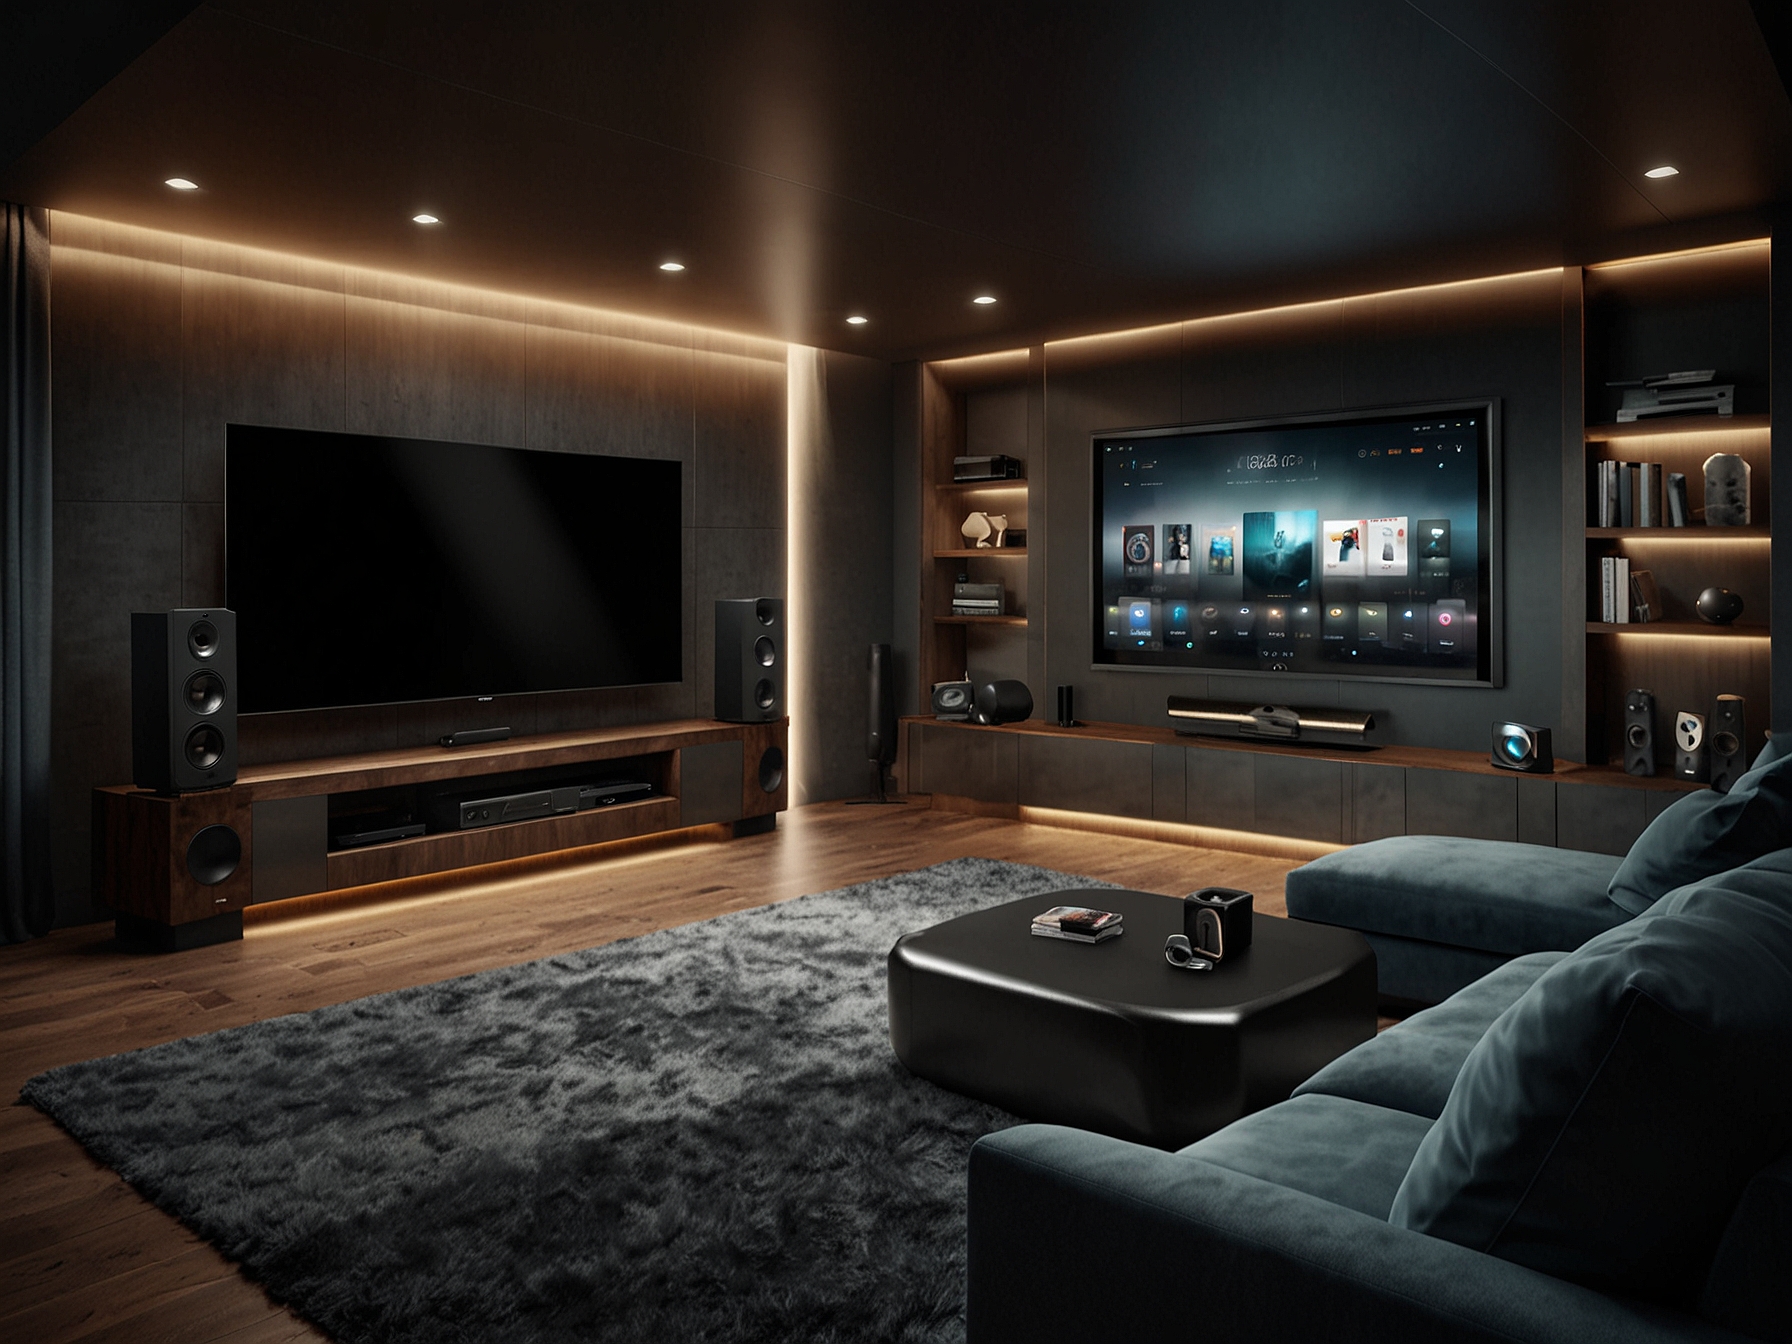 A modern home theater system integrated with smart home devices, highlighting the trend towards smart home ecosystems and customized audio-visual solutions.